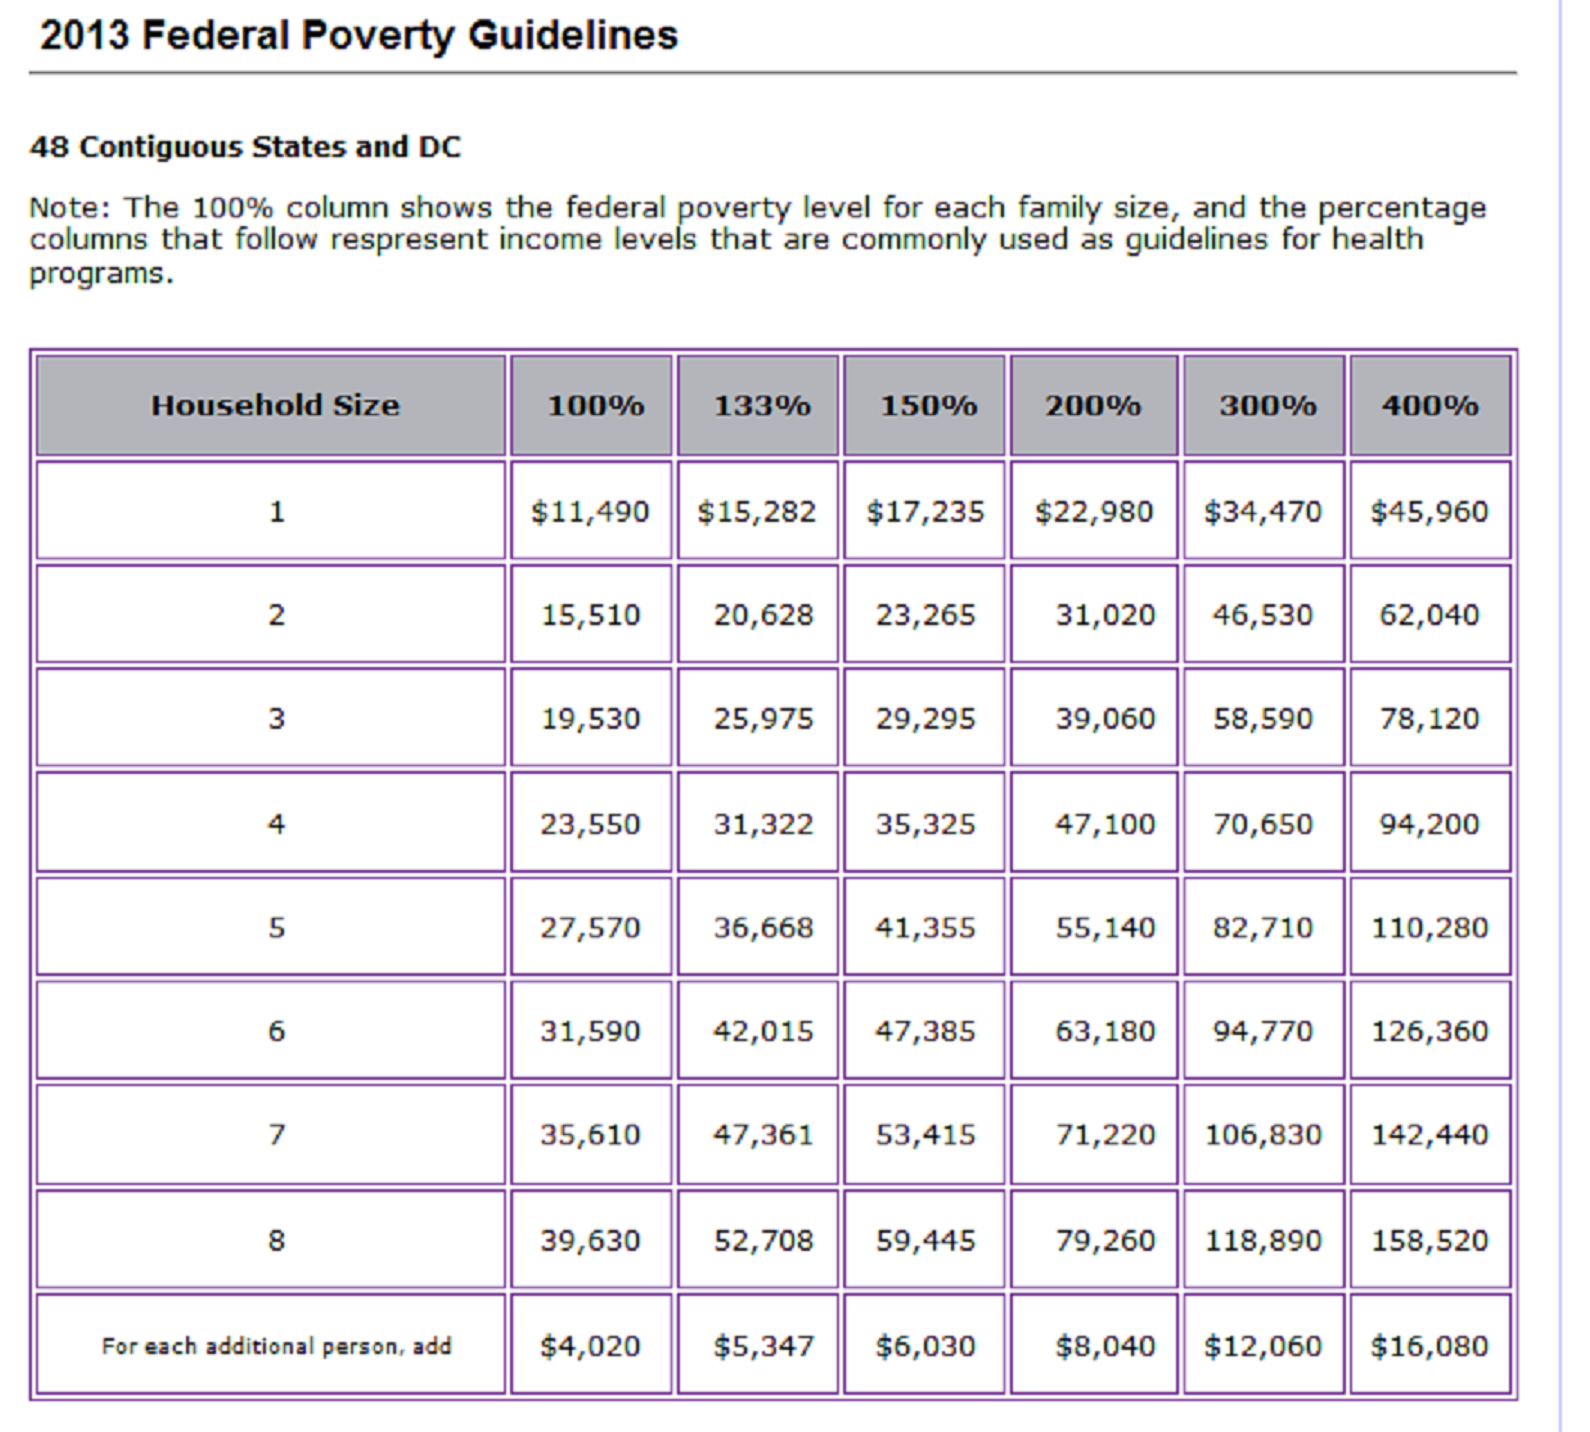 2013 Federal Poverty Guidelines, 48 Continuous States - Source: Tucson Citizen - http://tucsoncitizen.com/obamacare-news/2013/05/28/obamacare-help-and-the-federal-poverty-level/